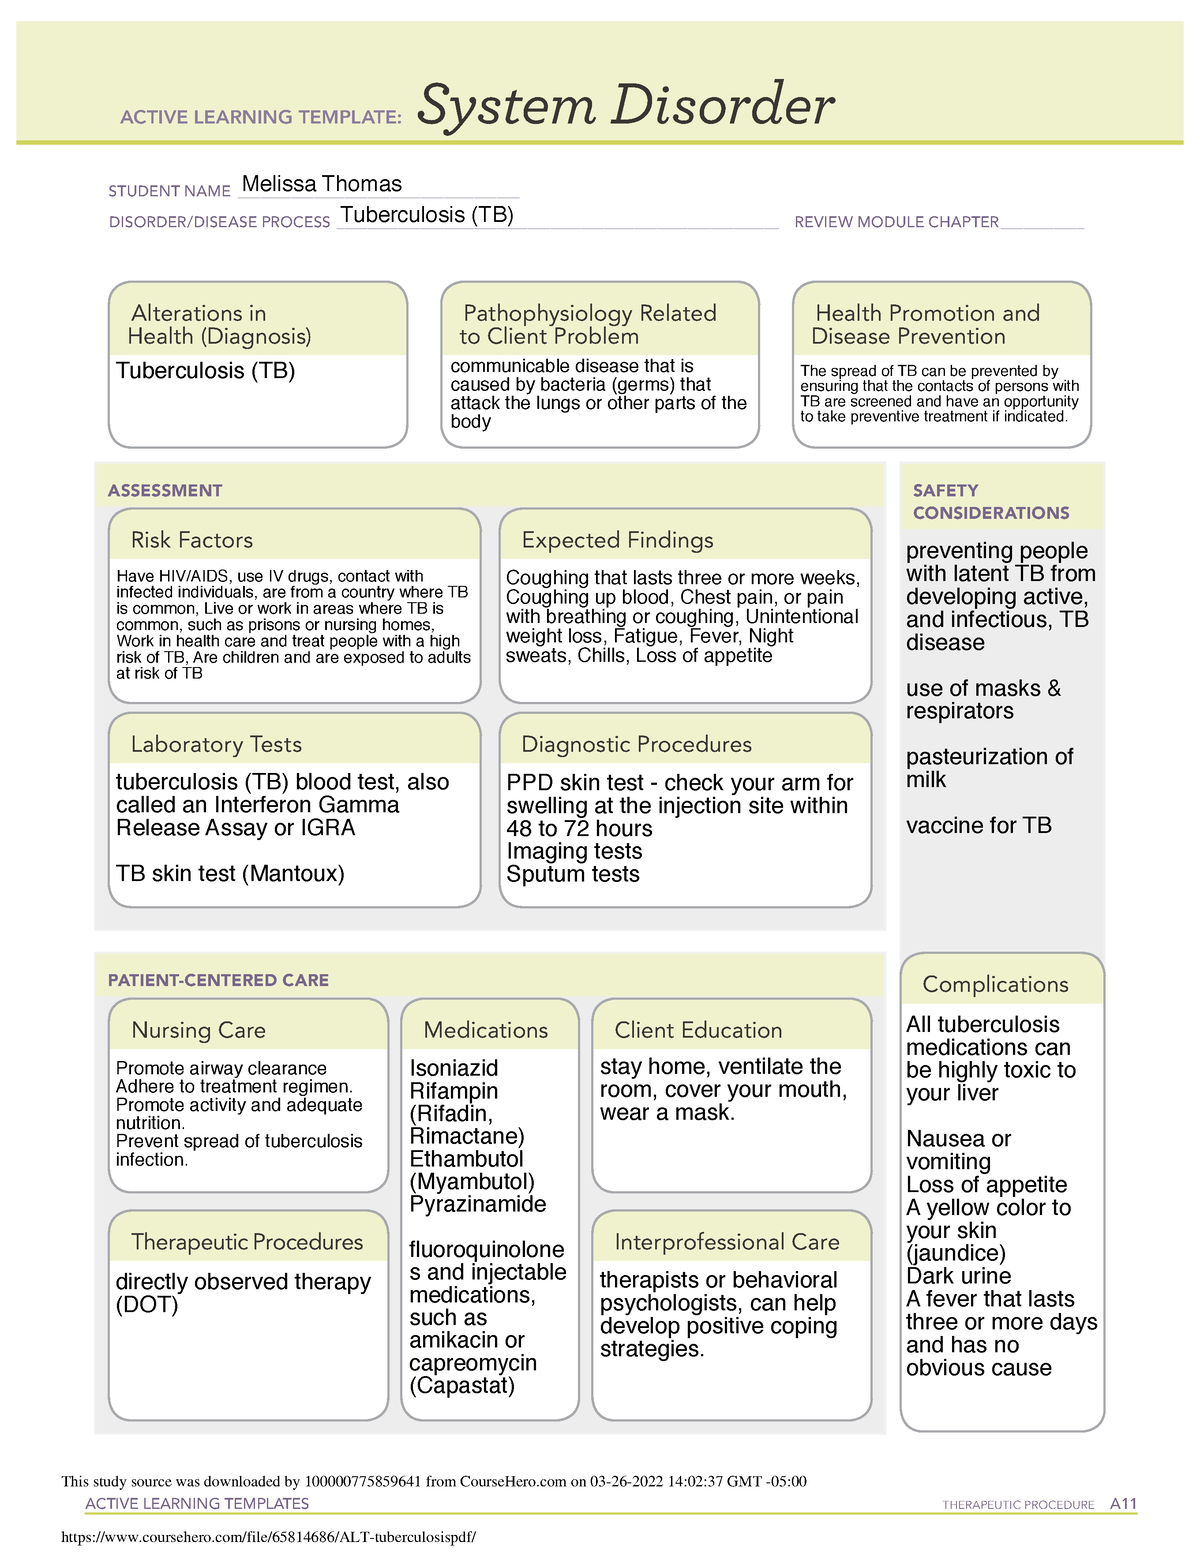 Tuberculosis System Disorder Template